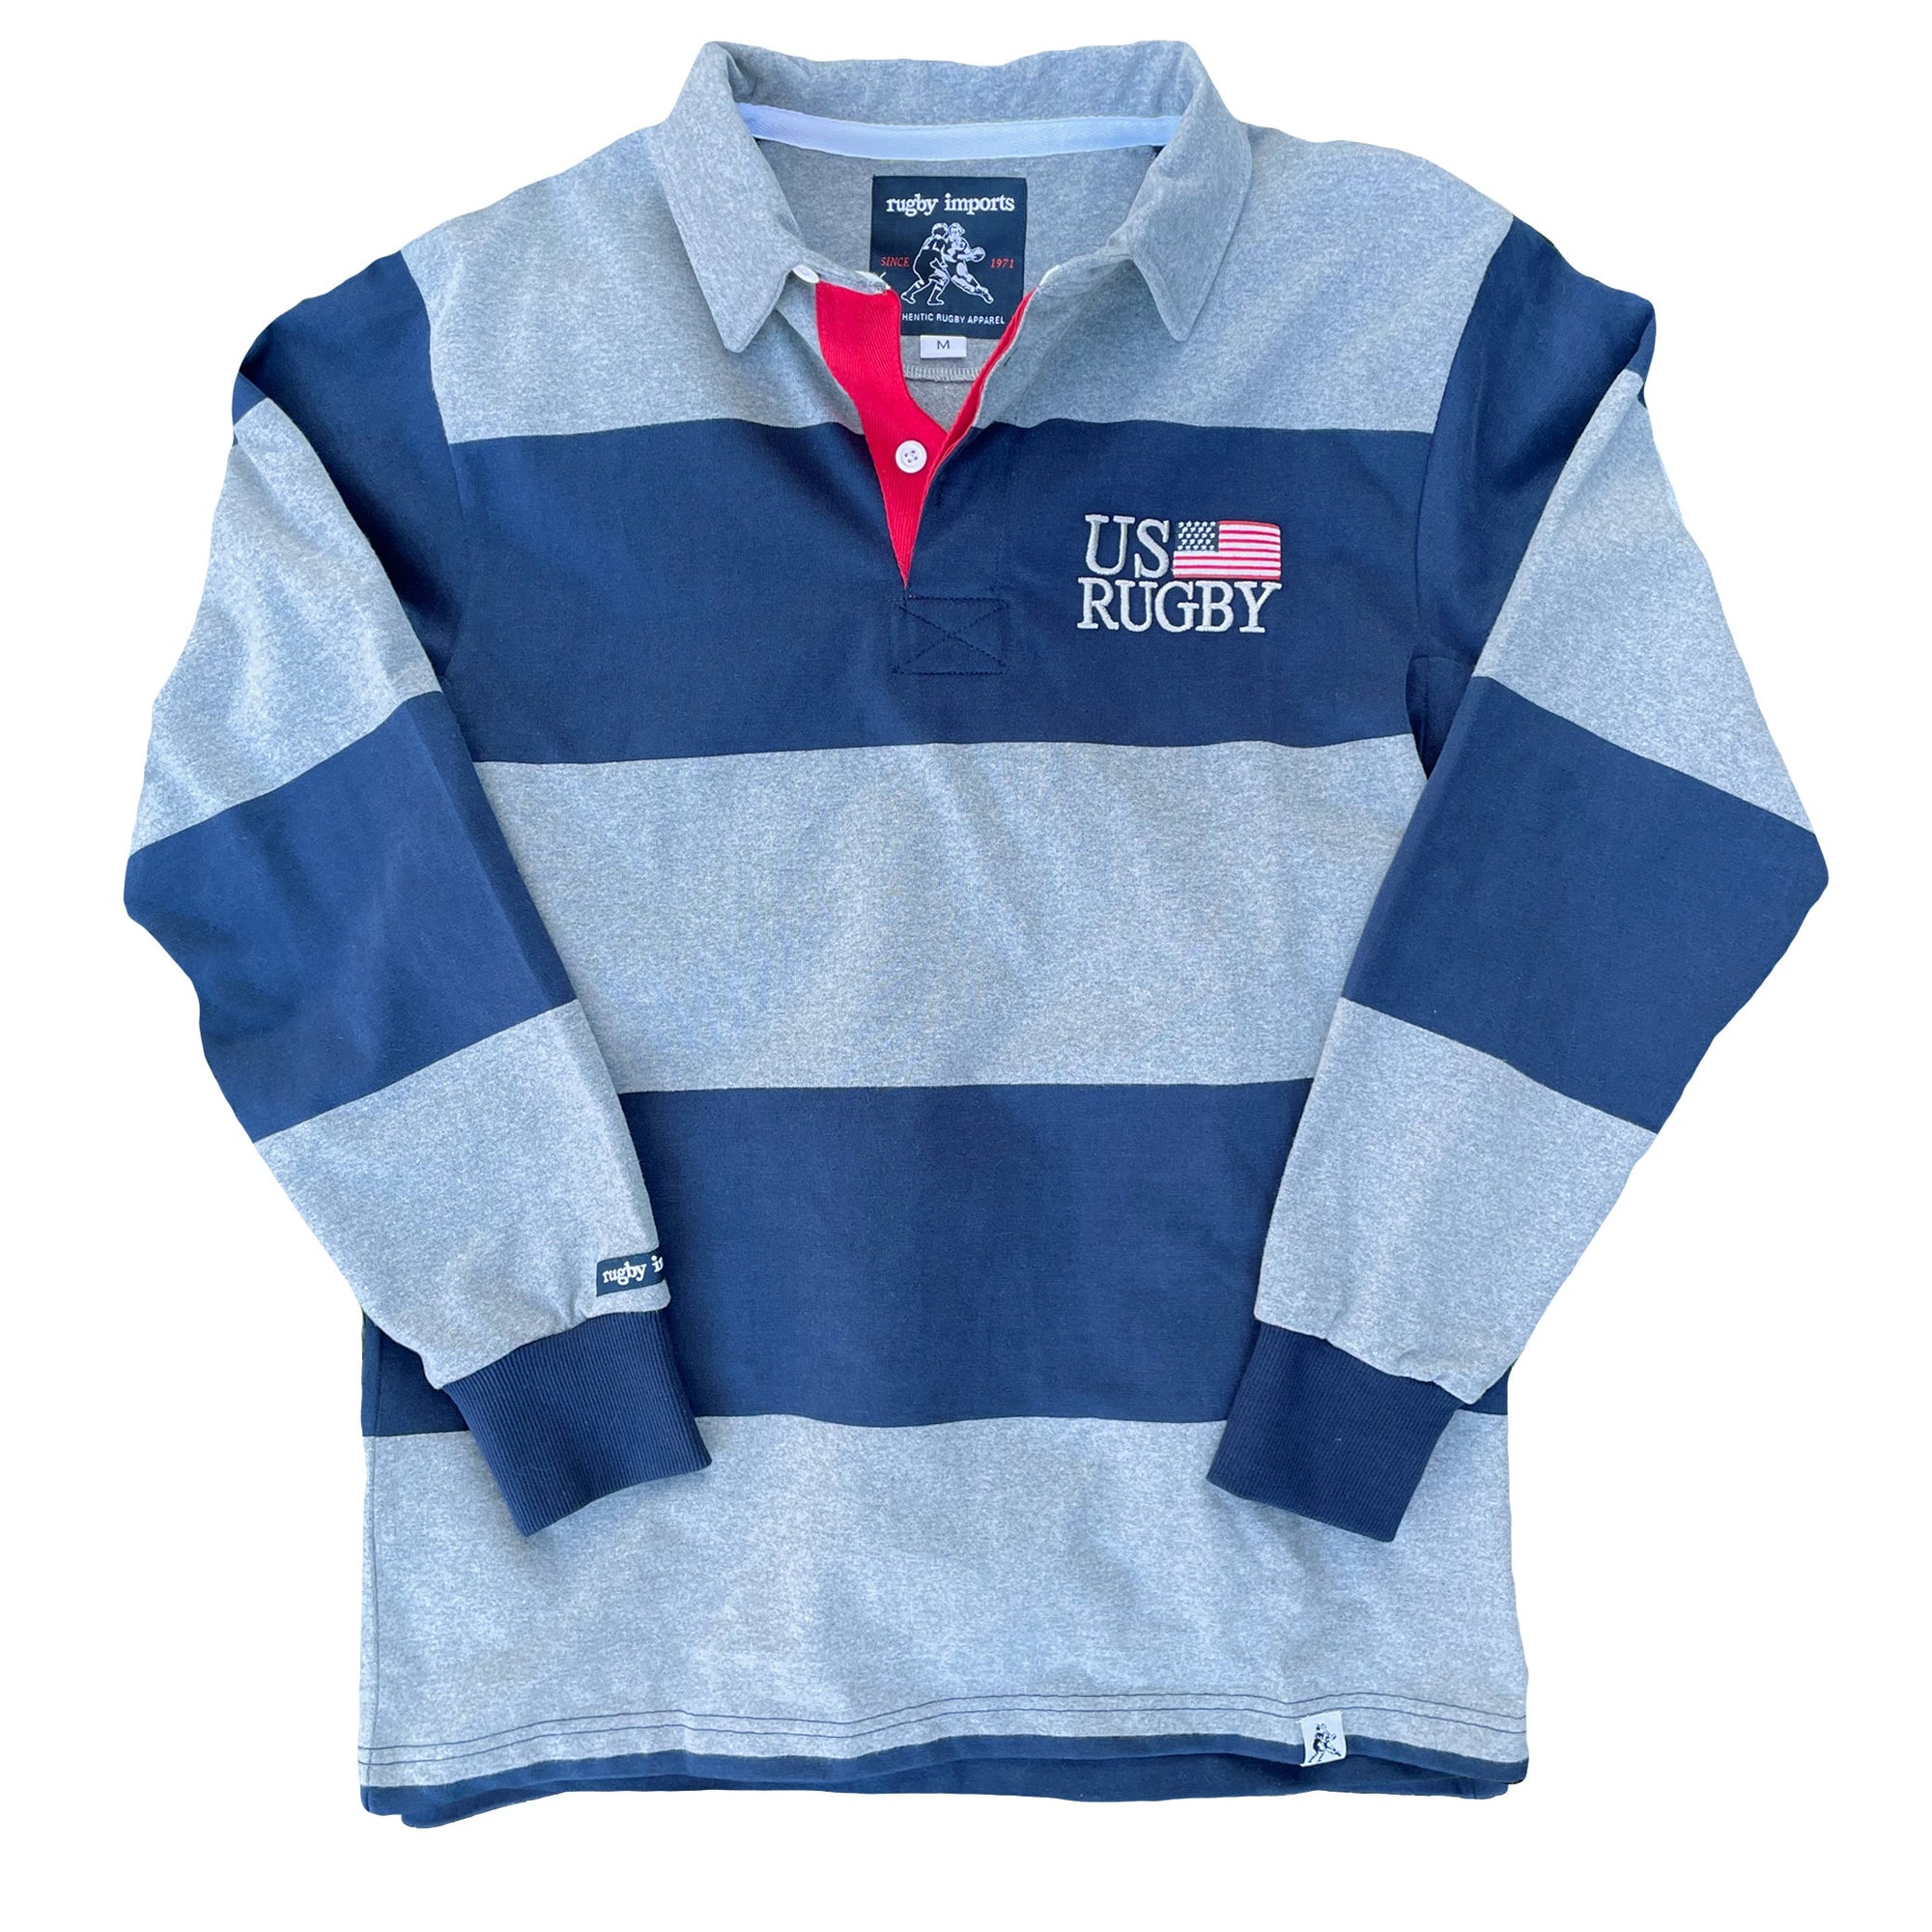 Rugby Imports USA Grey Hoops Rugby Jersey